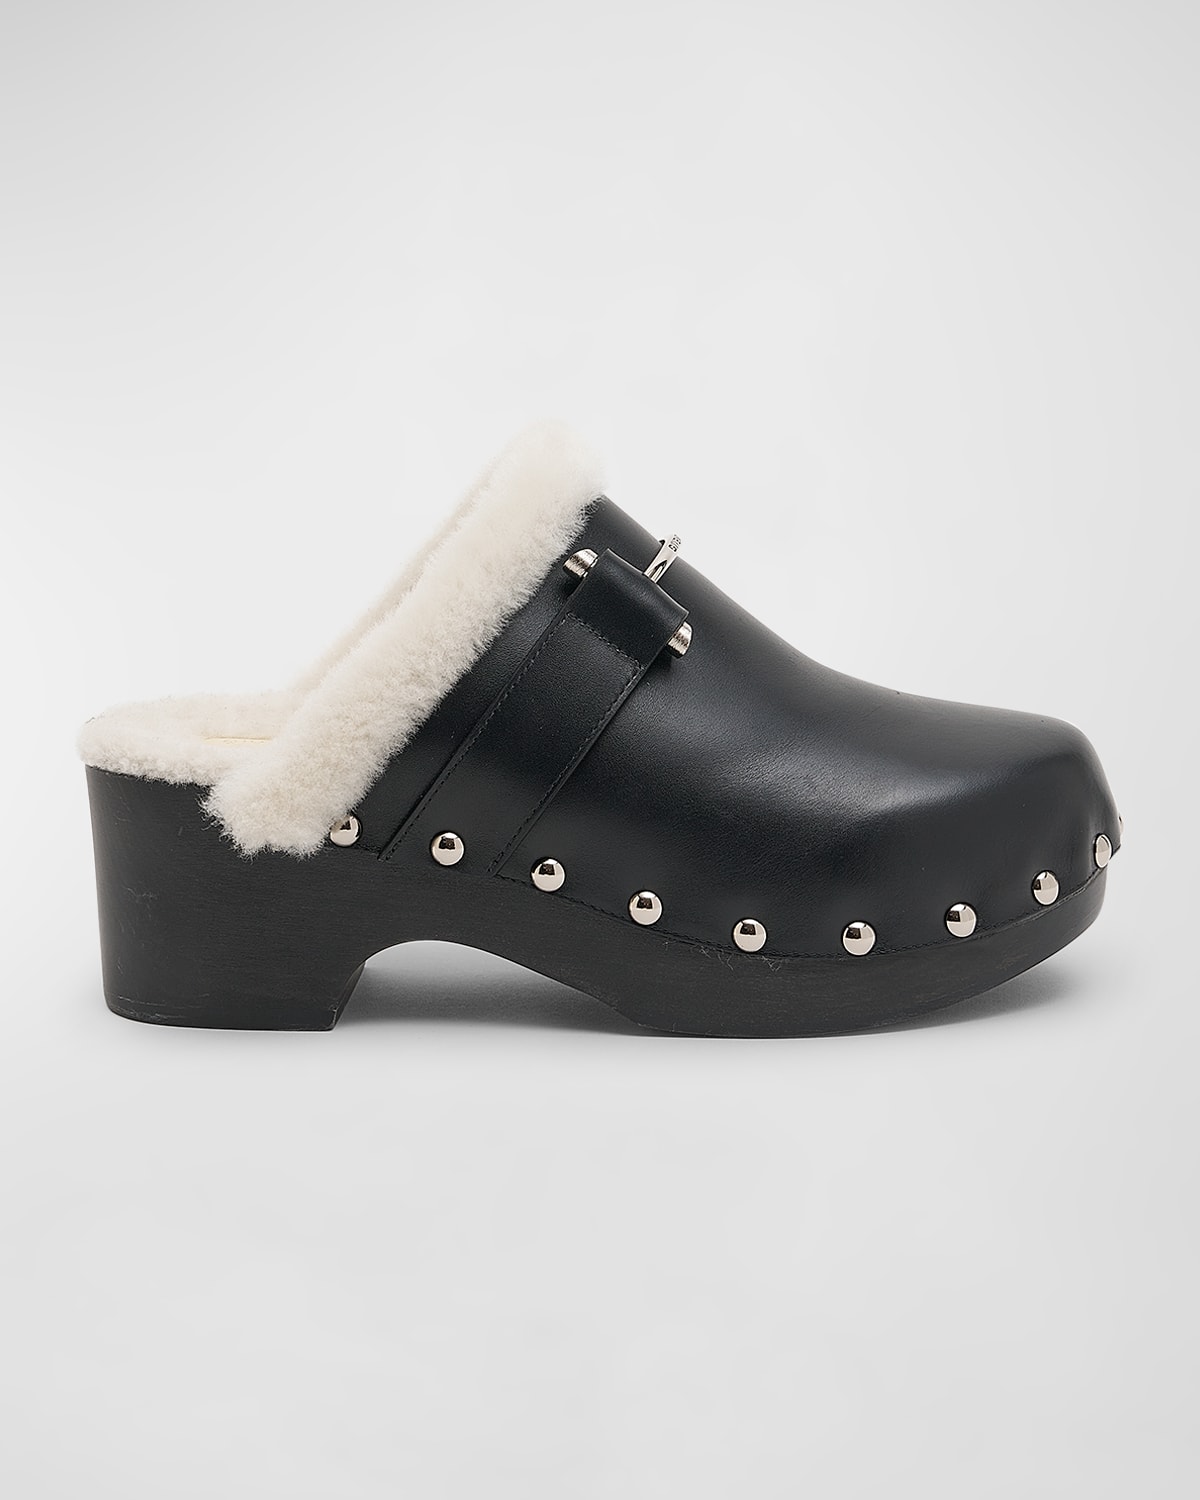 GIVENCHY G LEATHER SHEARLING SLIDE CLOGS